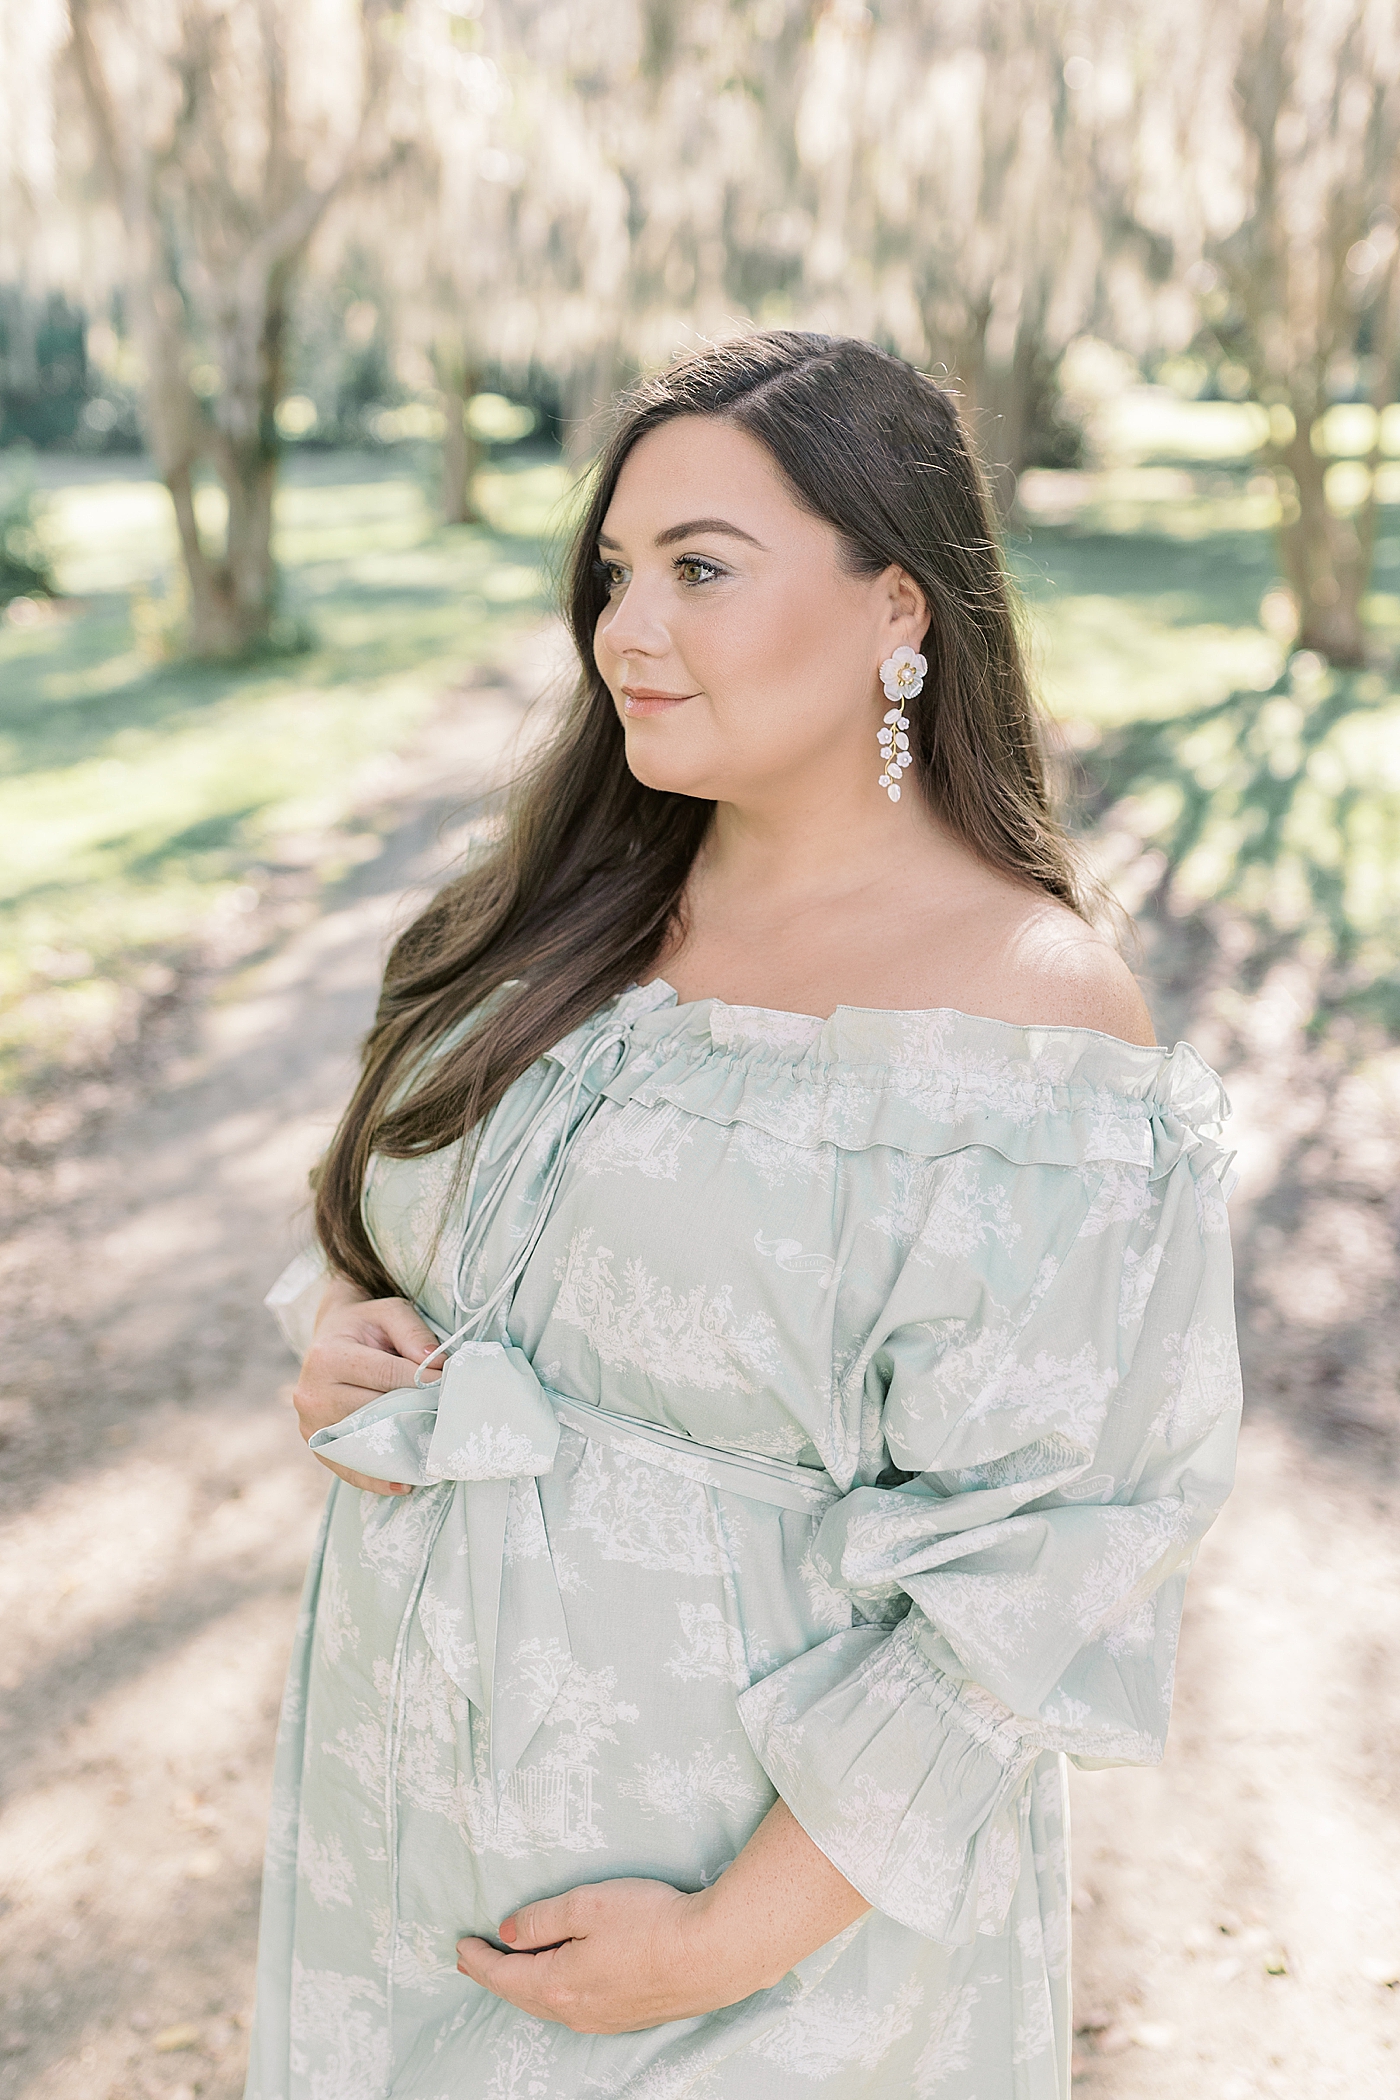 Expecting mother in a green off-the-shoulder spring dress smiling and holding her pregnant belly | Image by Caitlyn Motycka 